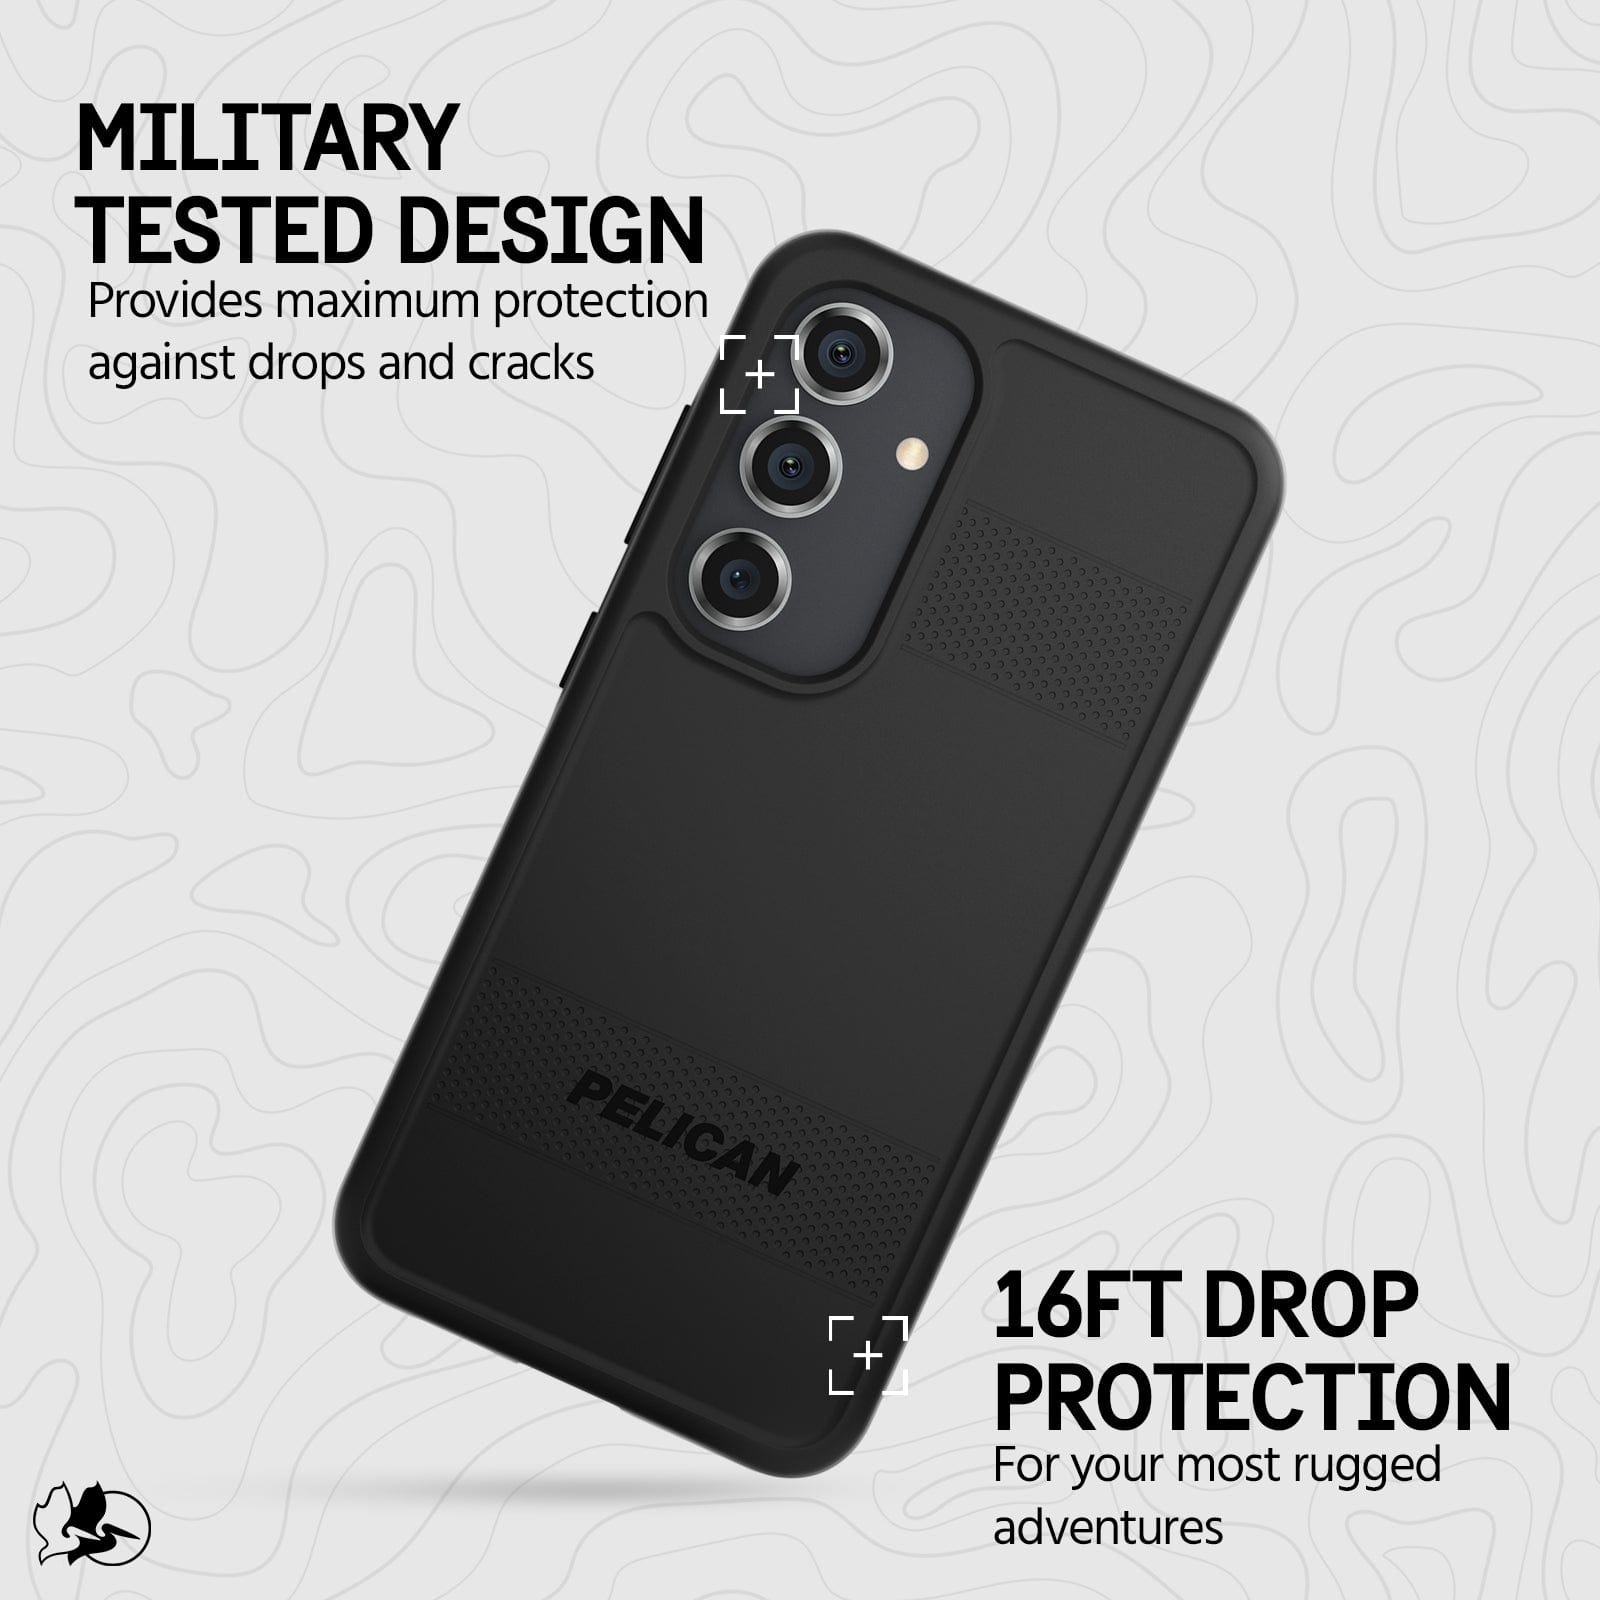 MILITARY TESTED DESIGN PROVIDES MAXIMUM PROTECTION AGAINST DROPS AND CRACKS. 16FT DROP PROTECTION FOR YOUR MOST RUGGED ADVENTURES